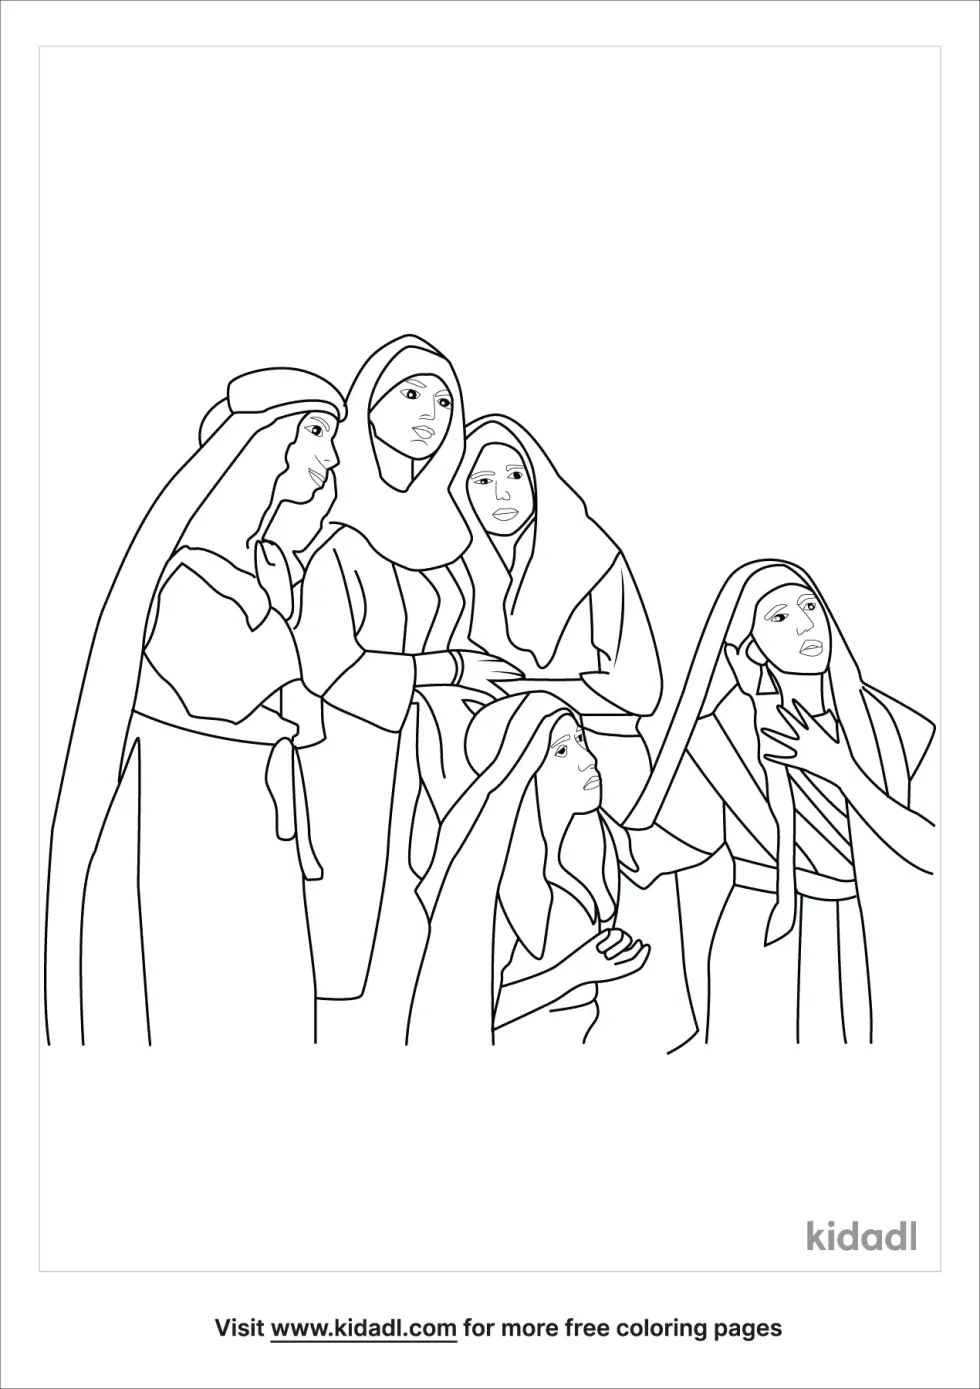 Zelophehad's Daughters Coloring Page